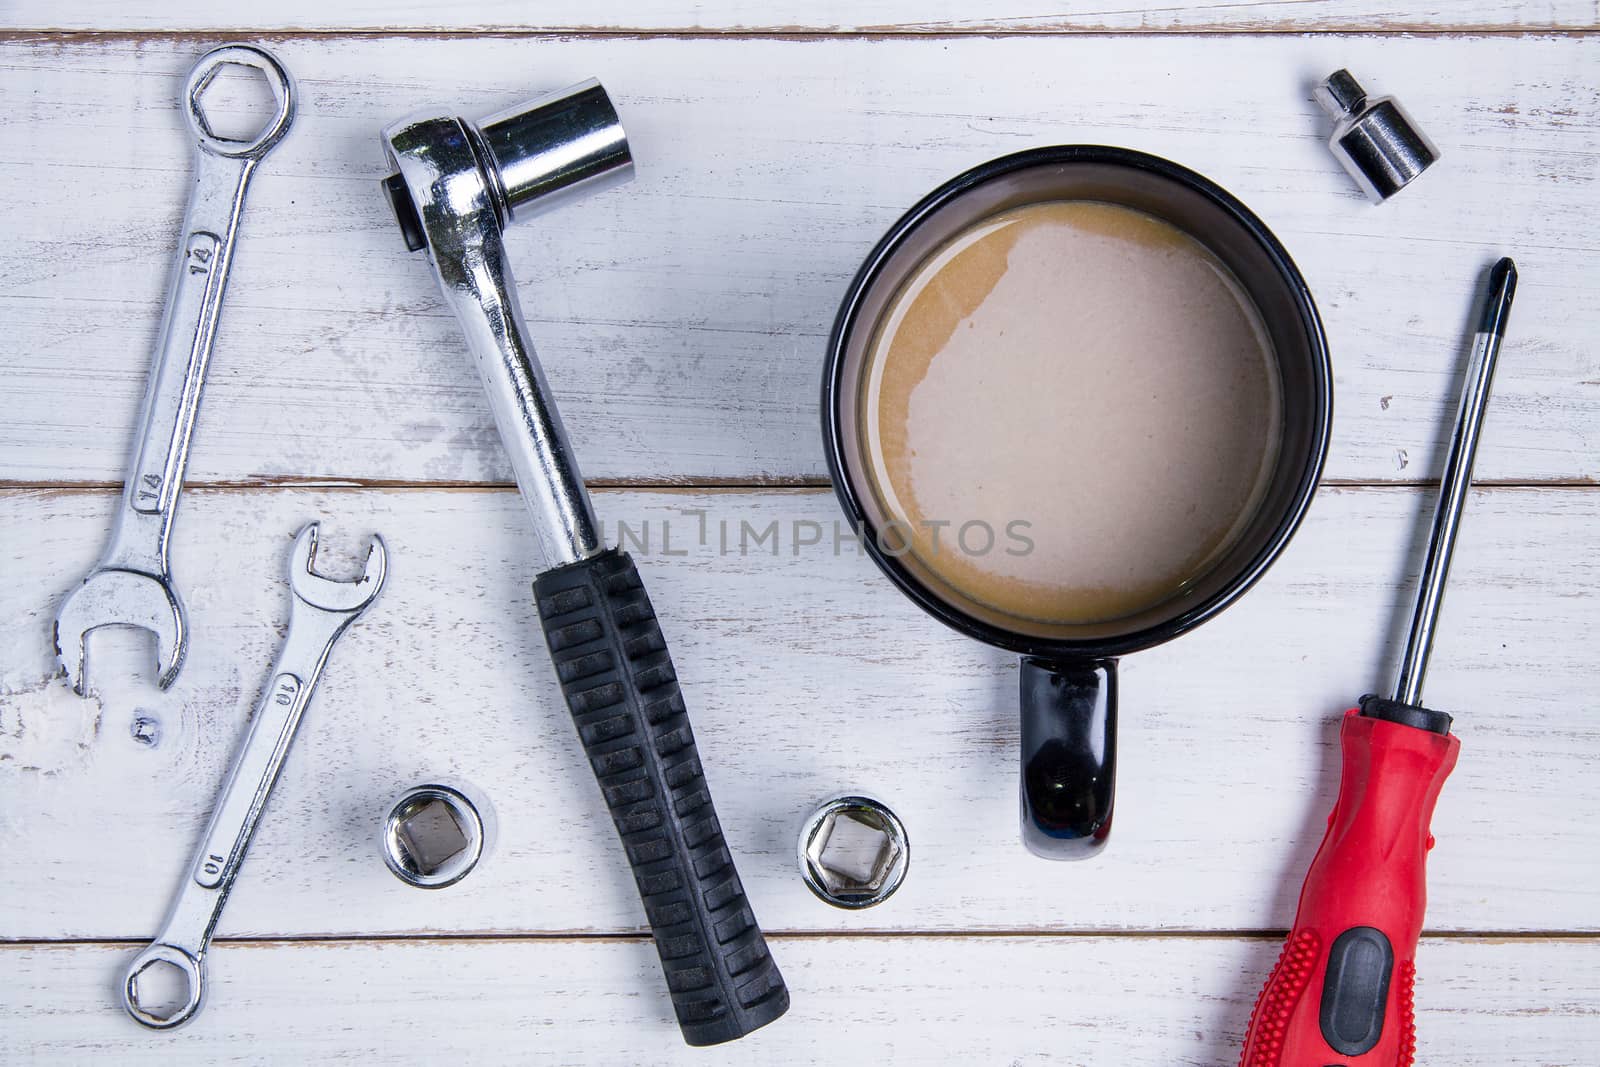 Coffee cup and equipment repair on the white wooden background.